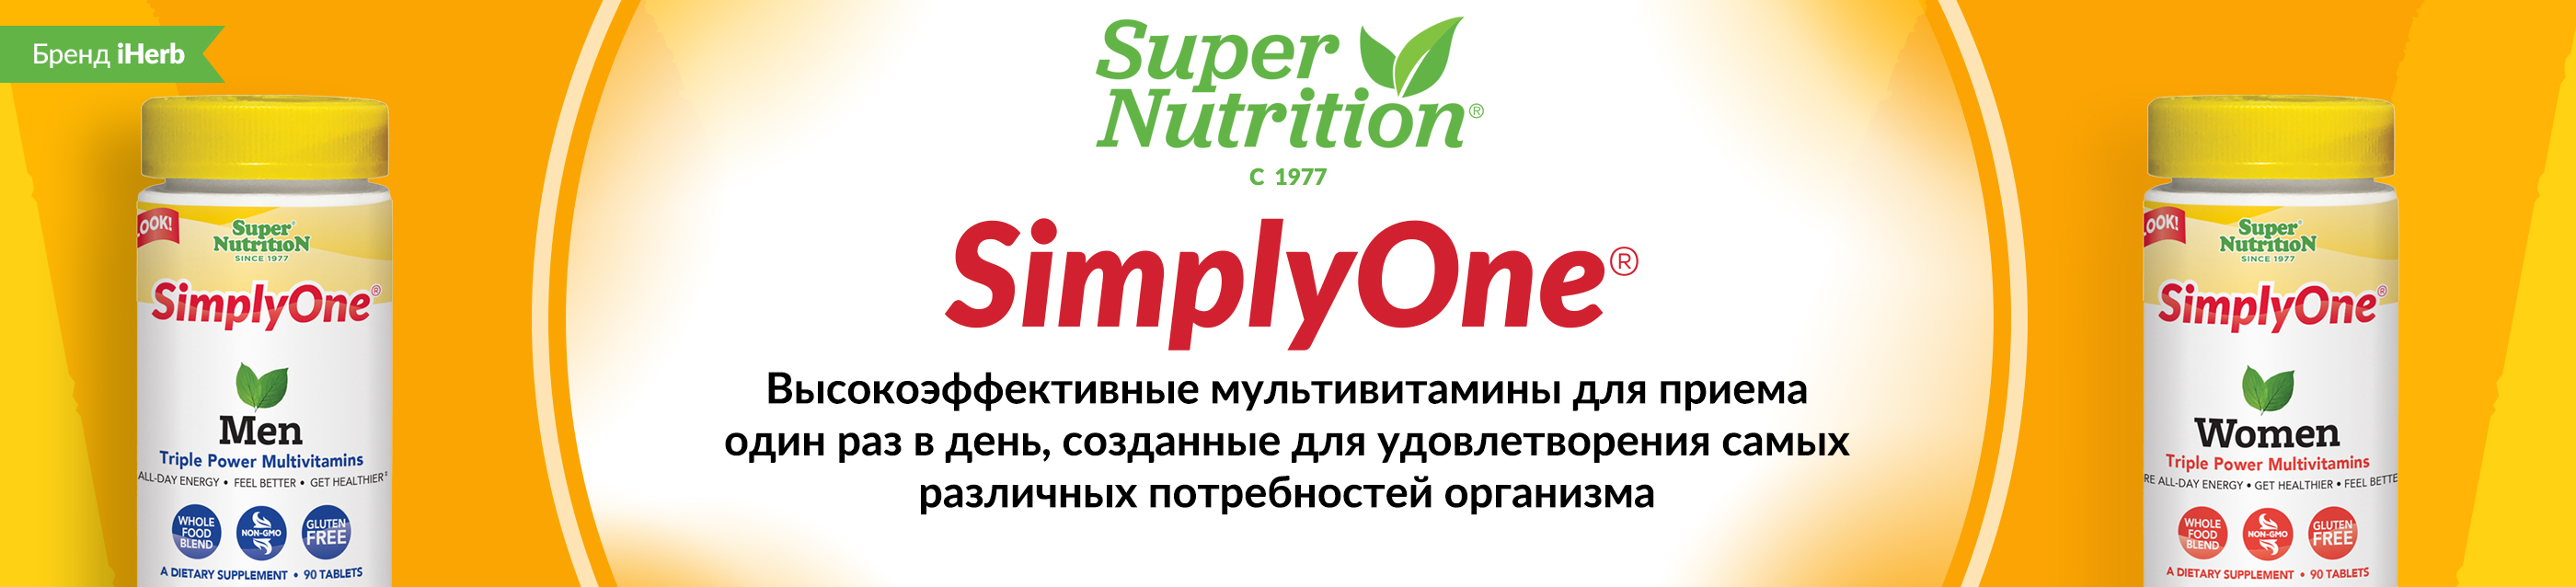 Super Nutrition Simply One